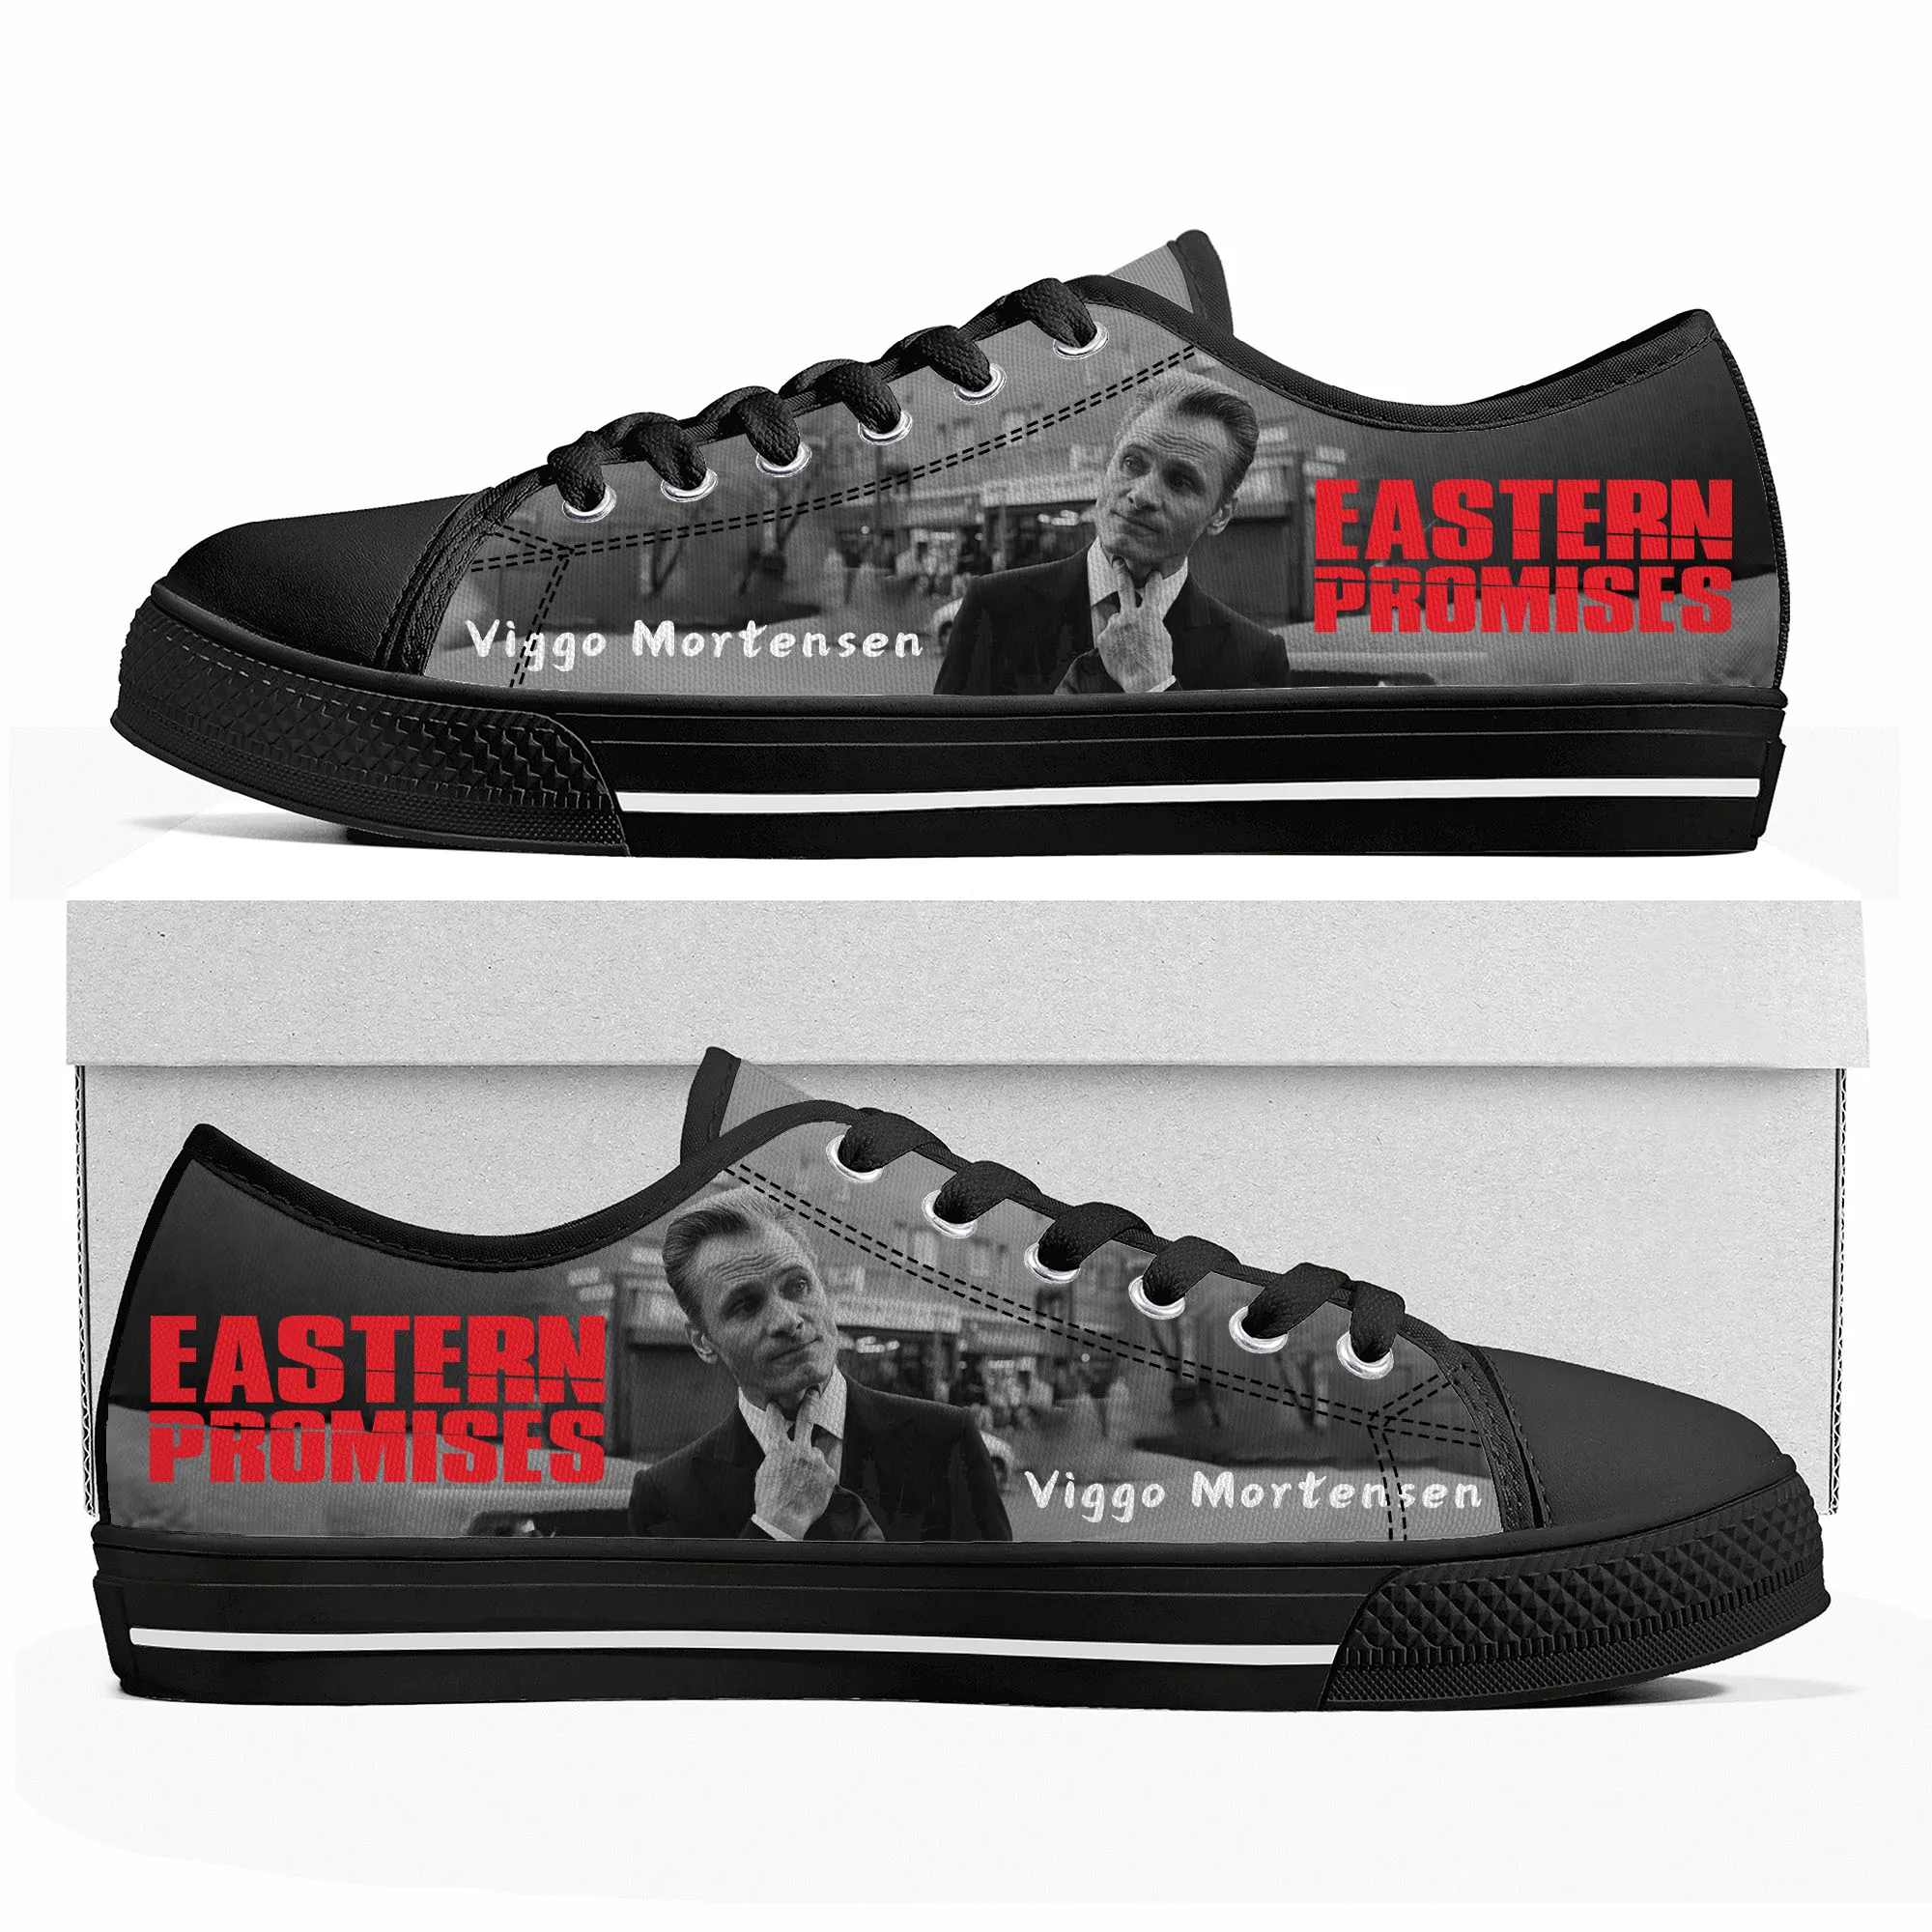 

Eastern Promises Low Top Sneakers Mens Womens Teenager High Quality Viggo Mortensen Canvas Sneaker Casual Shoes Customize Shoe